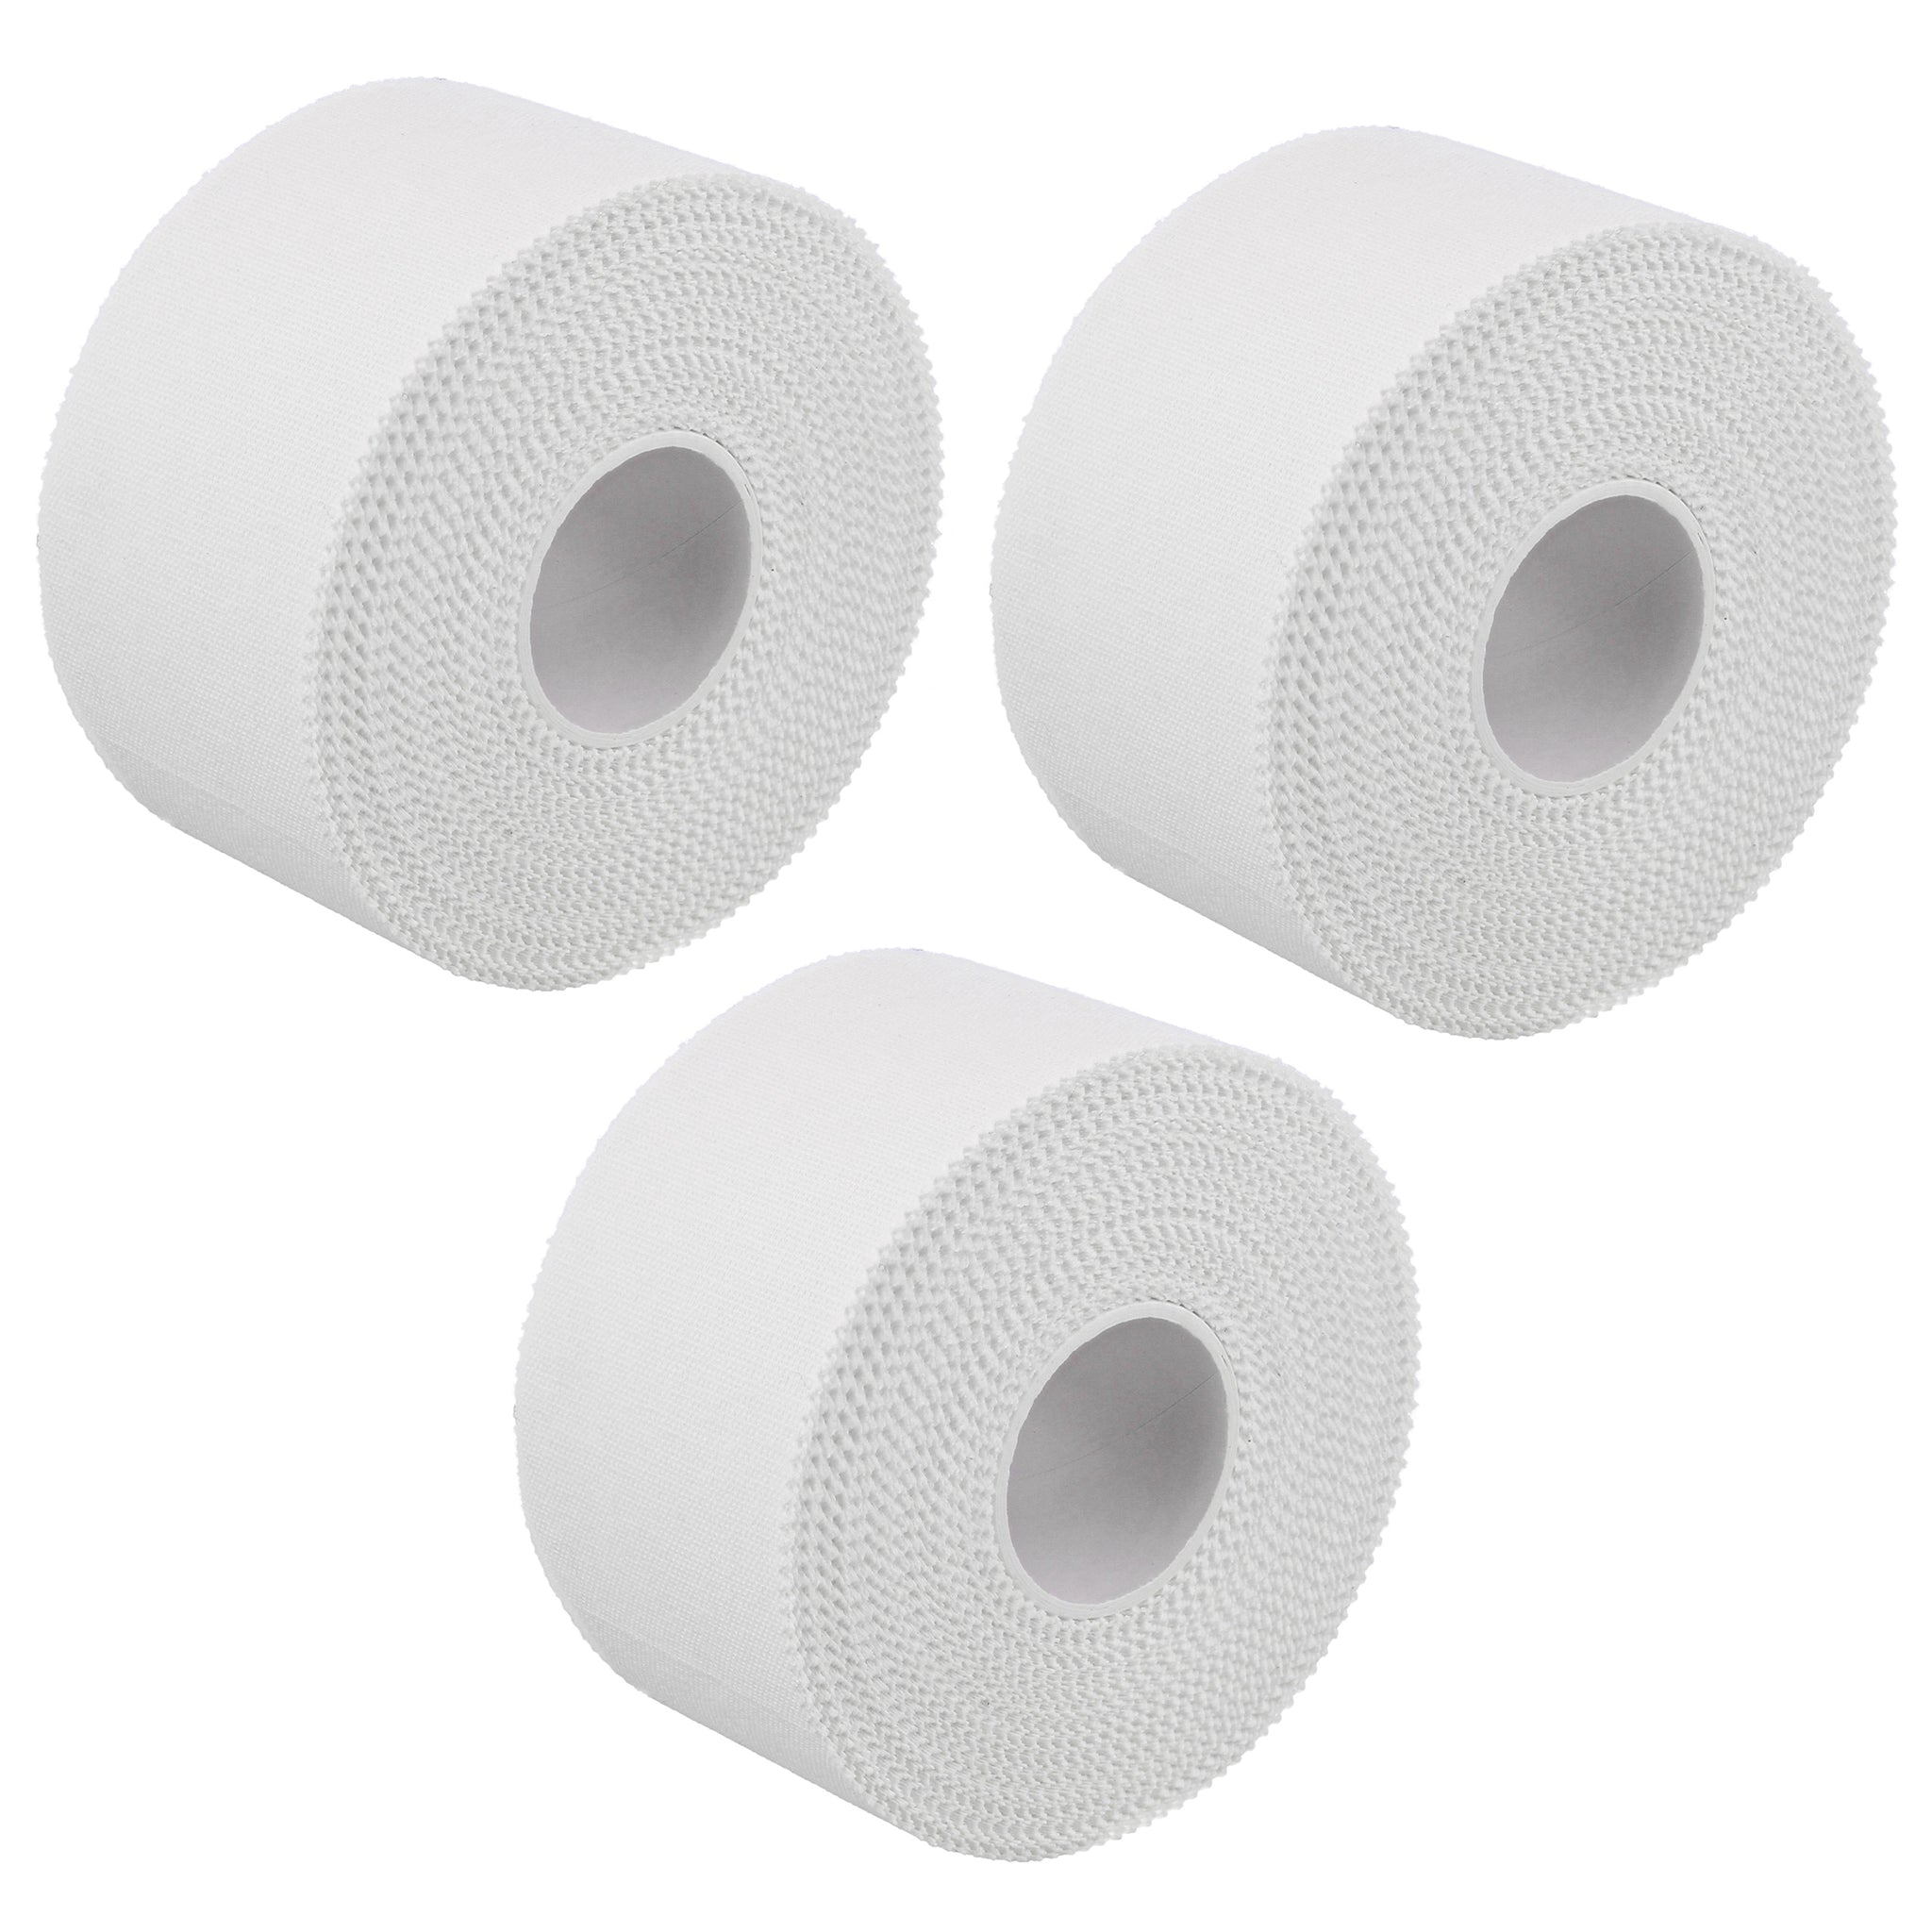 SPORT TAPE 1 x 10 YD, WHITE, S/C, Tapes & Wraps, By Product, Open  Catalog